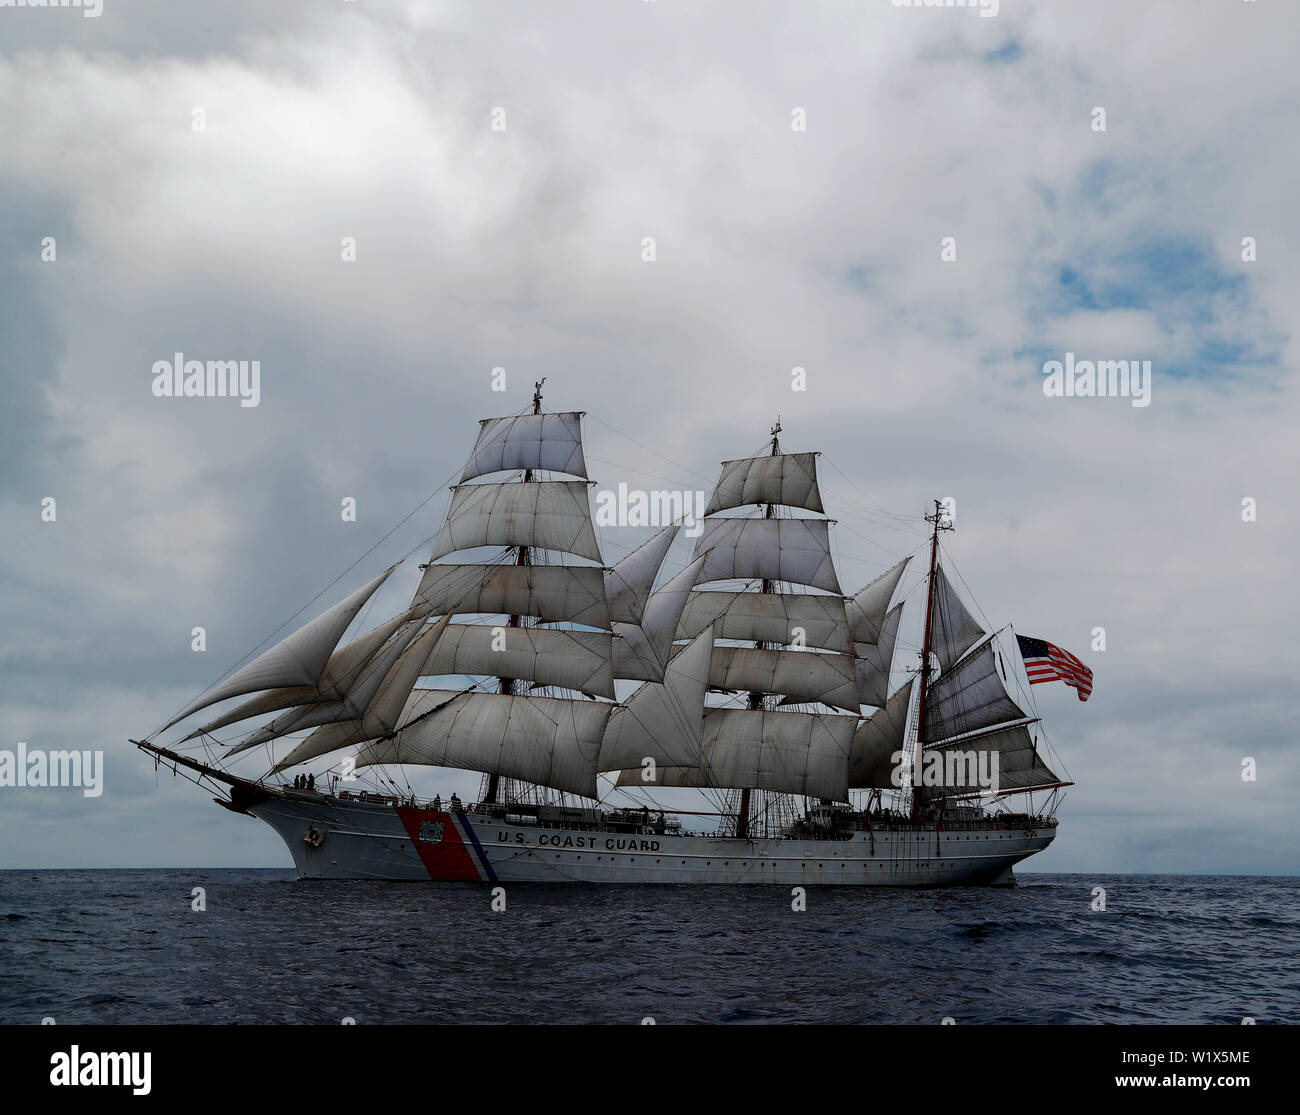 ATLANTIC OCEAN (July 2, 2019) U.S. Coast Guard Tall Ship Eagle (WIX 327) sails in the Atlantic Ocean off the coast of the Azores. Eagle is a tall ship used as a training platform for future Coast Guard Academy officers as well as a vessel for establishing and maintaining domestic and international relationships. (U.S. Navy photo by Mass Communication Specialist 2nd Class Ruben Reed) Stock Photo